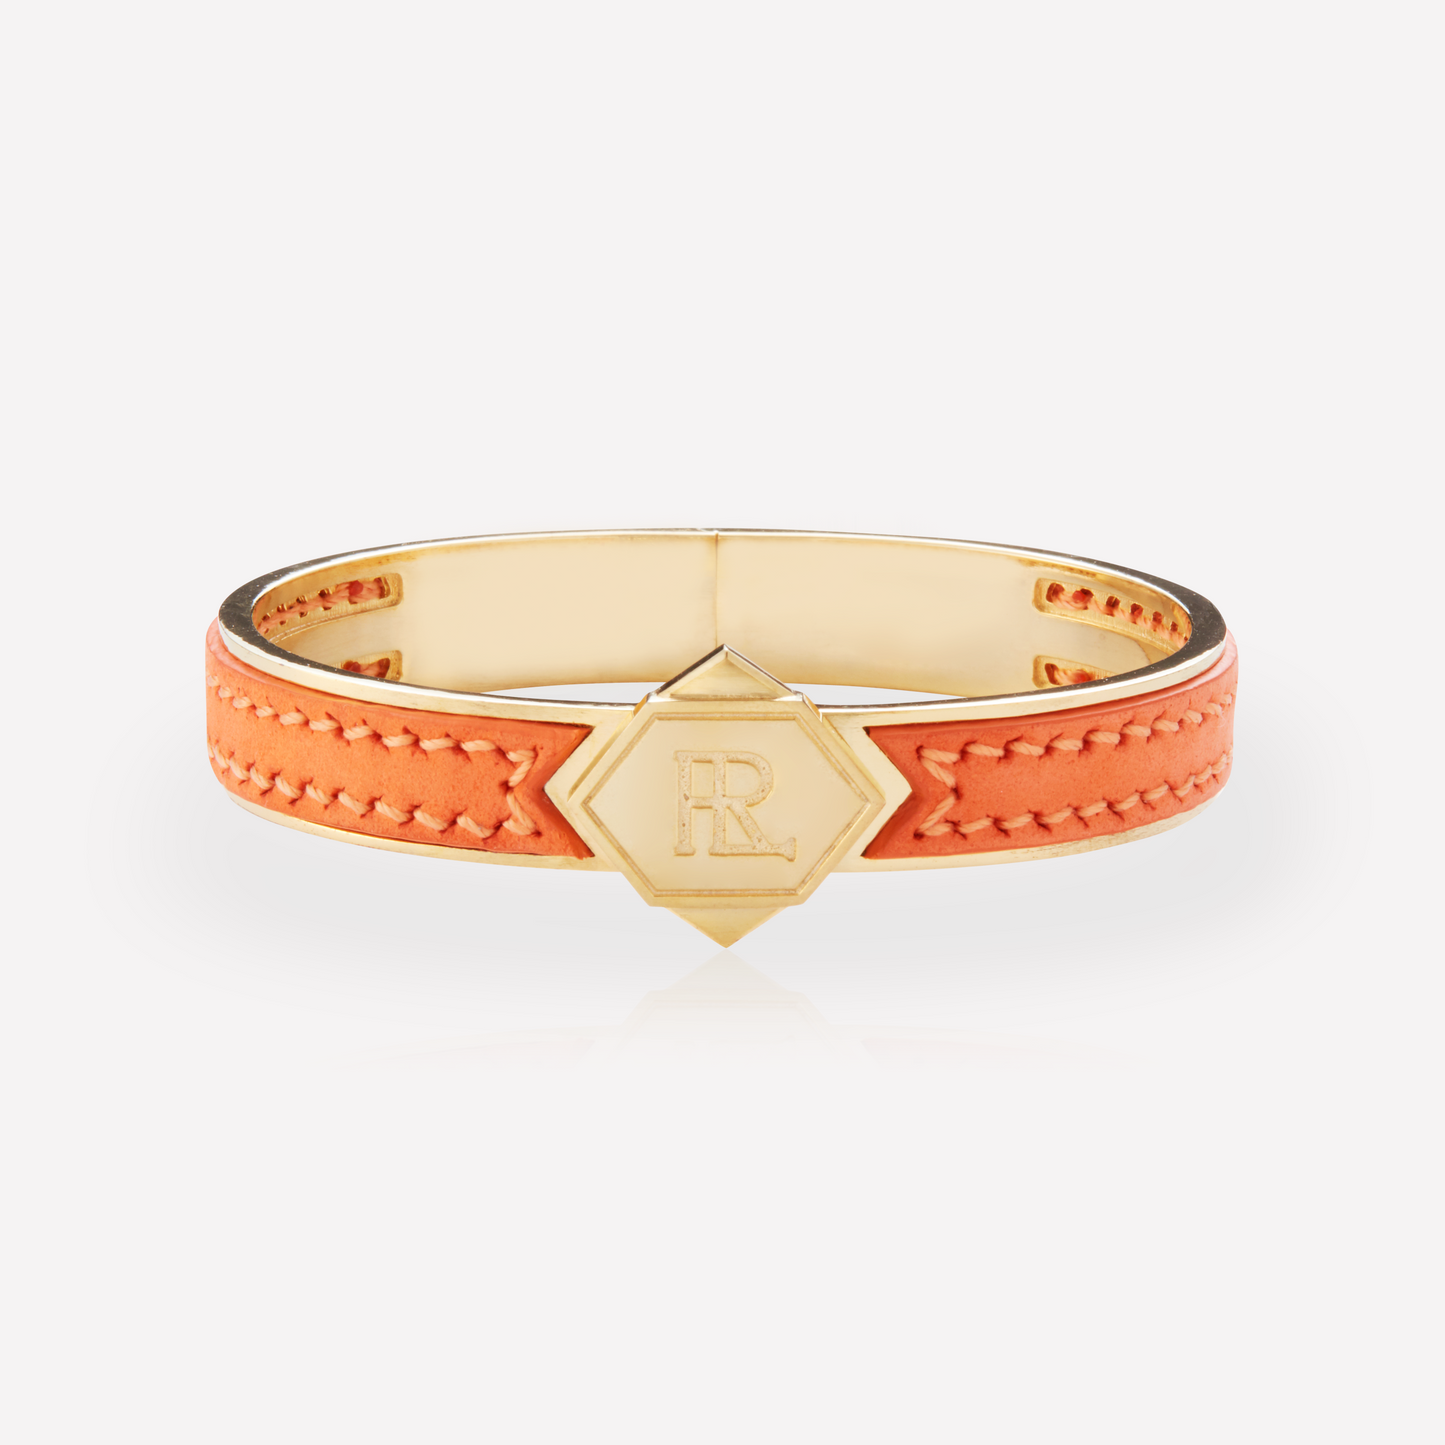 Twined Leather Bracelet, Large, Coral